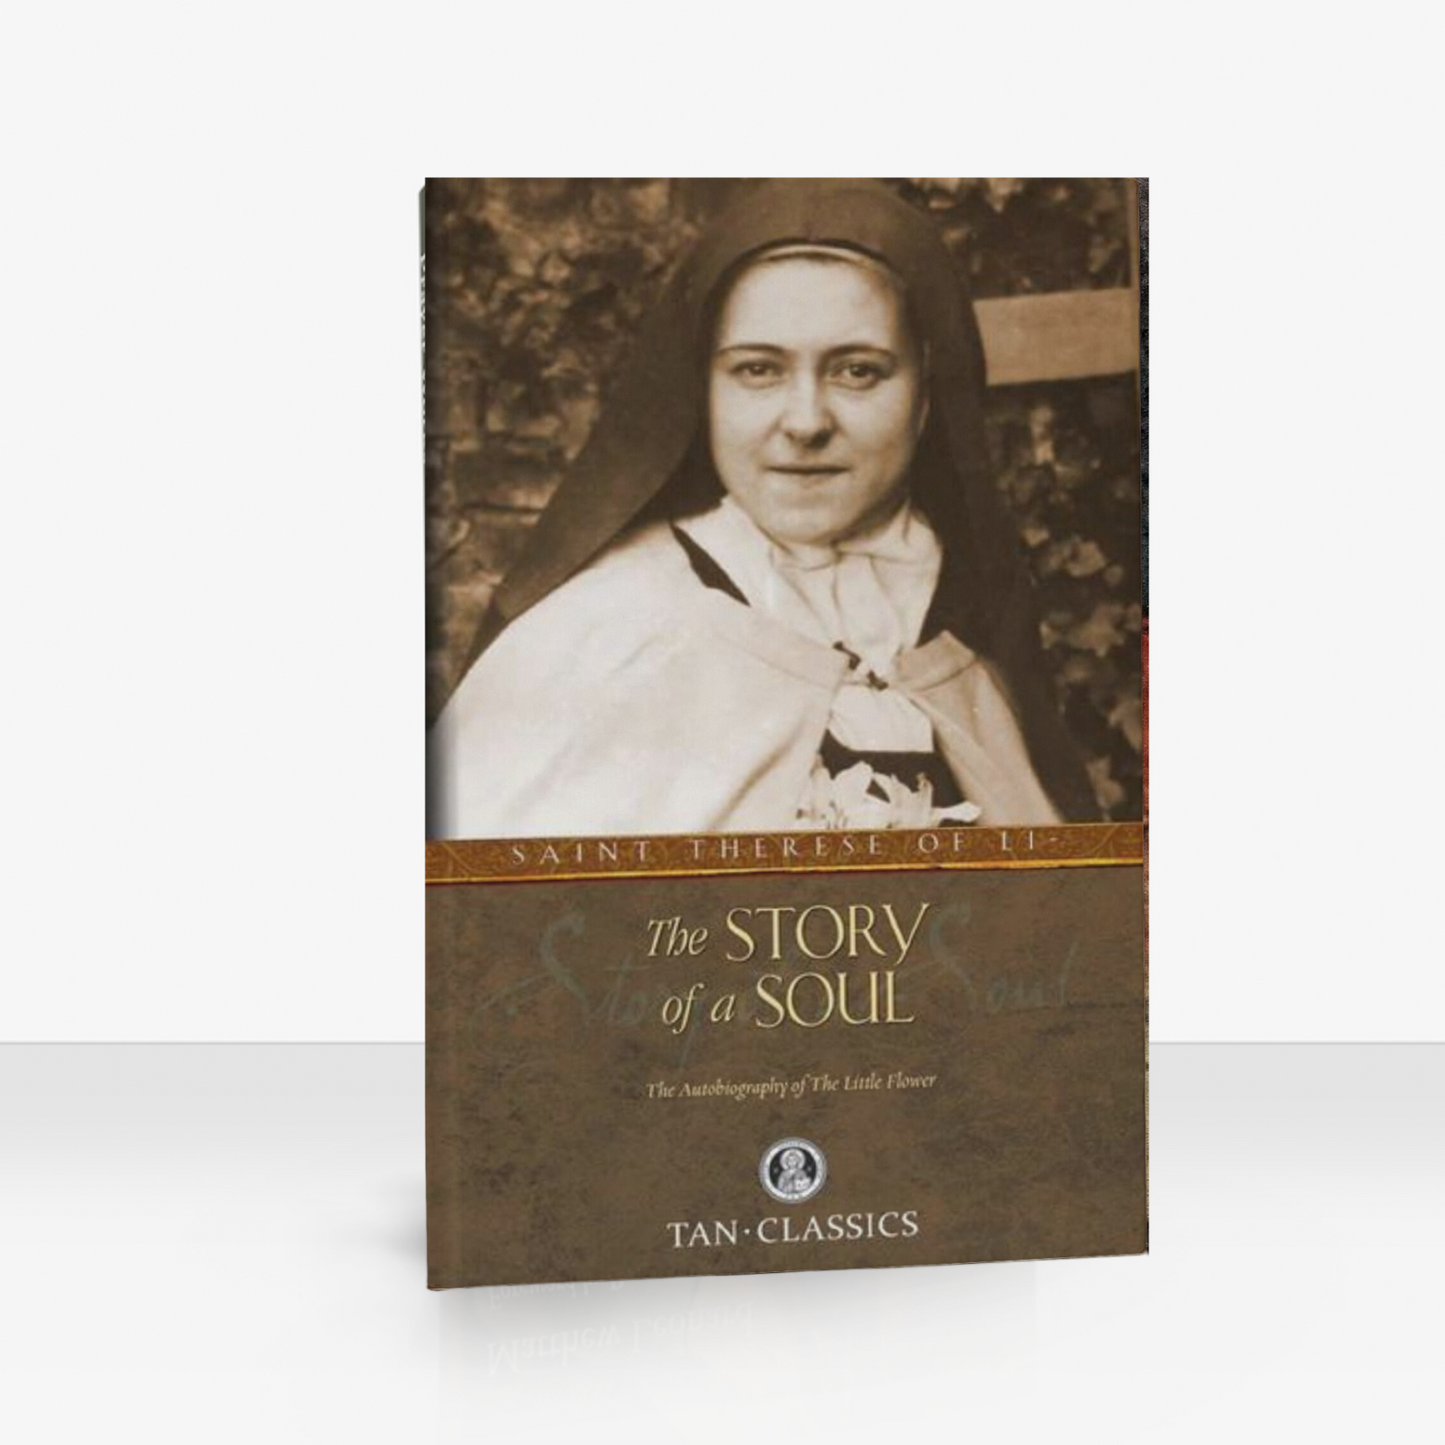 The Story of a Soul by St. Thérèse of Lisieux (TAN Books Edition)